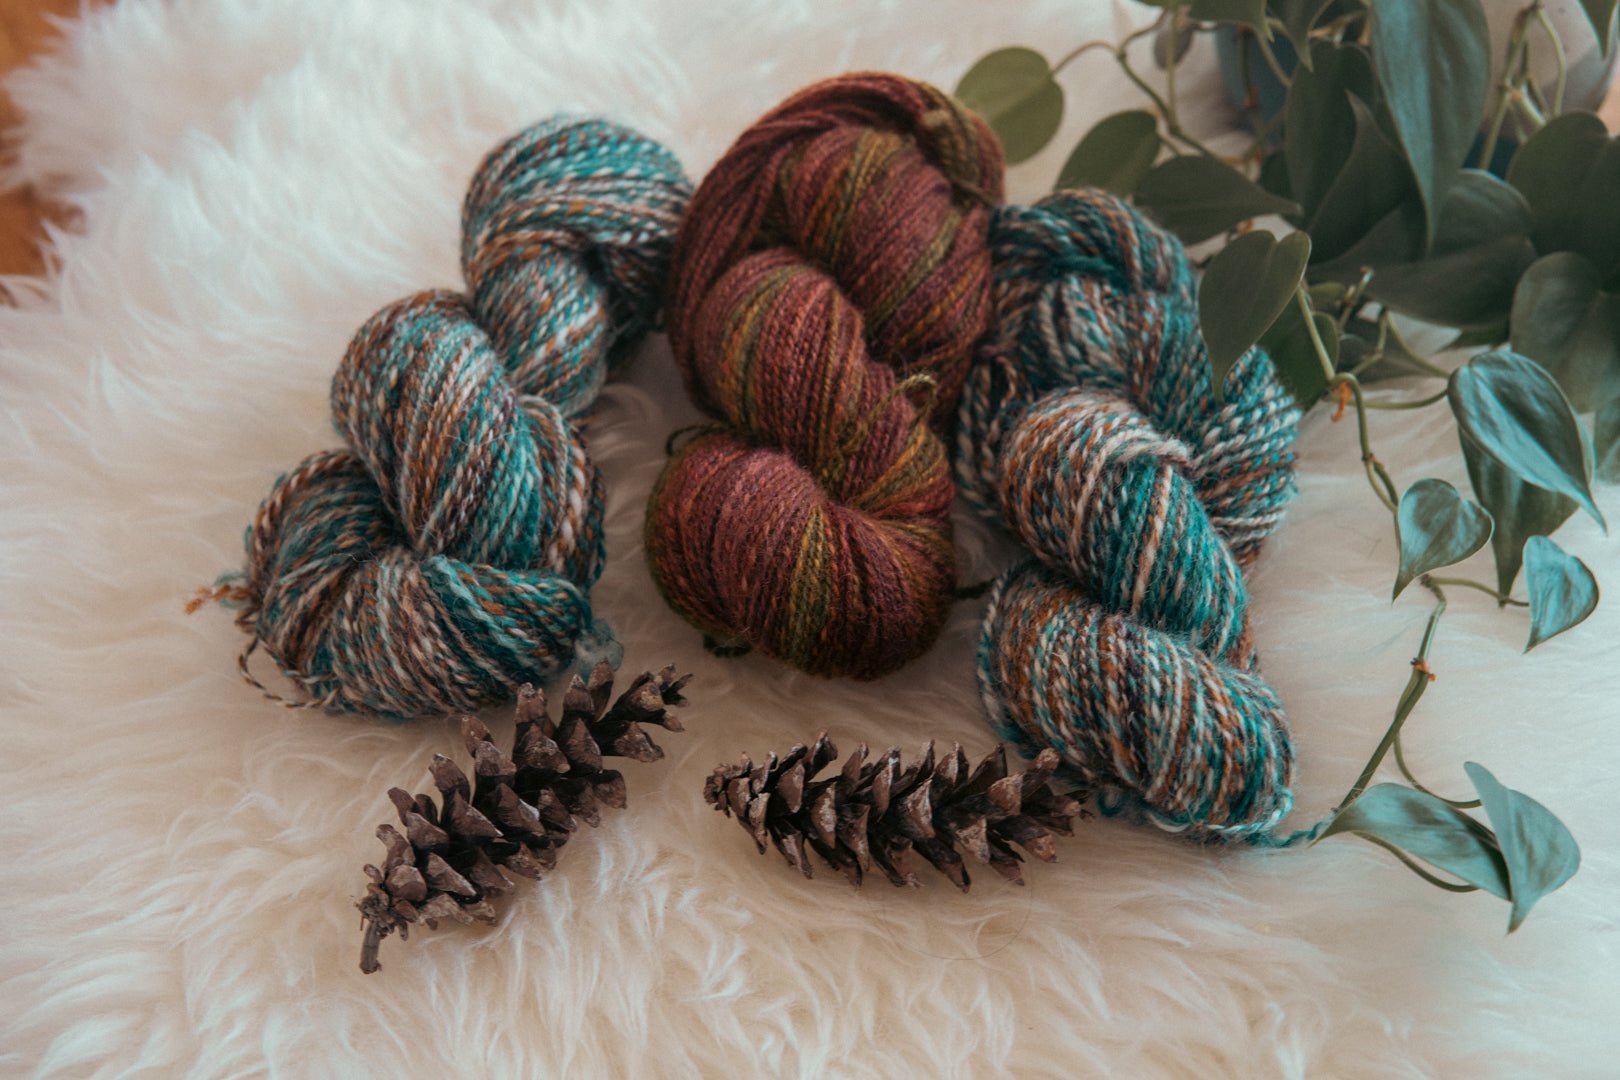 Does this yarn company align with my values? - Aimee Sher Makes